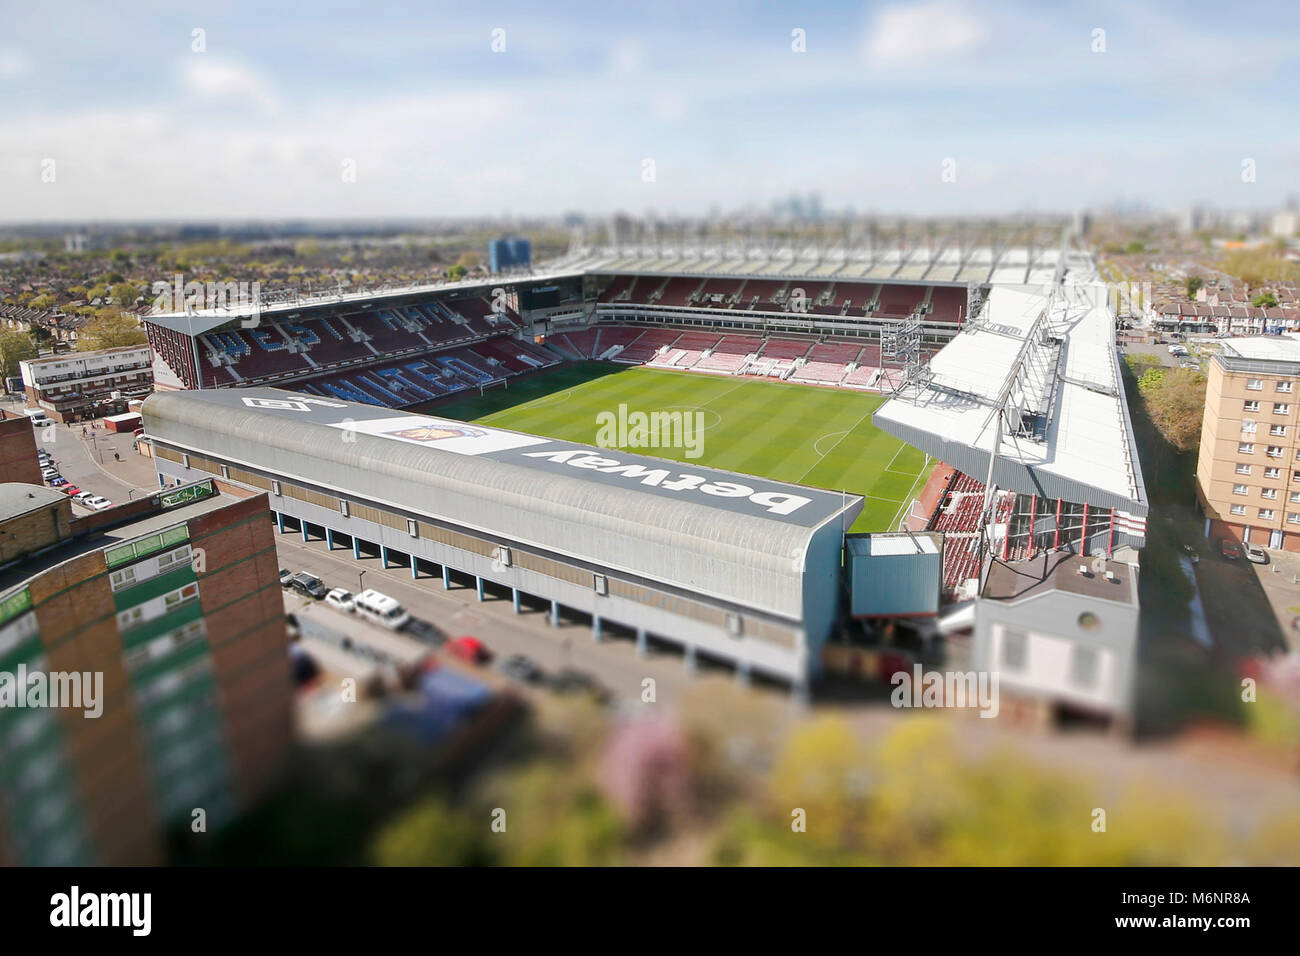 General view of the Boleyn Ground, Upton Park former home to West Ham United Football Club Stock Photo